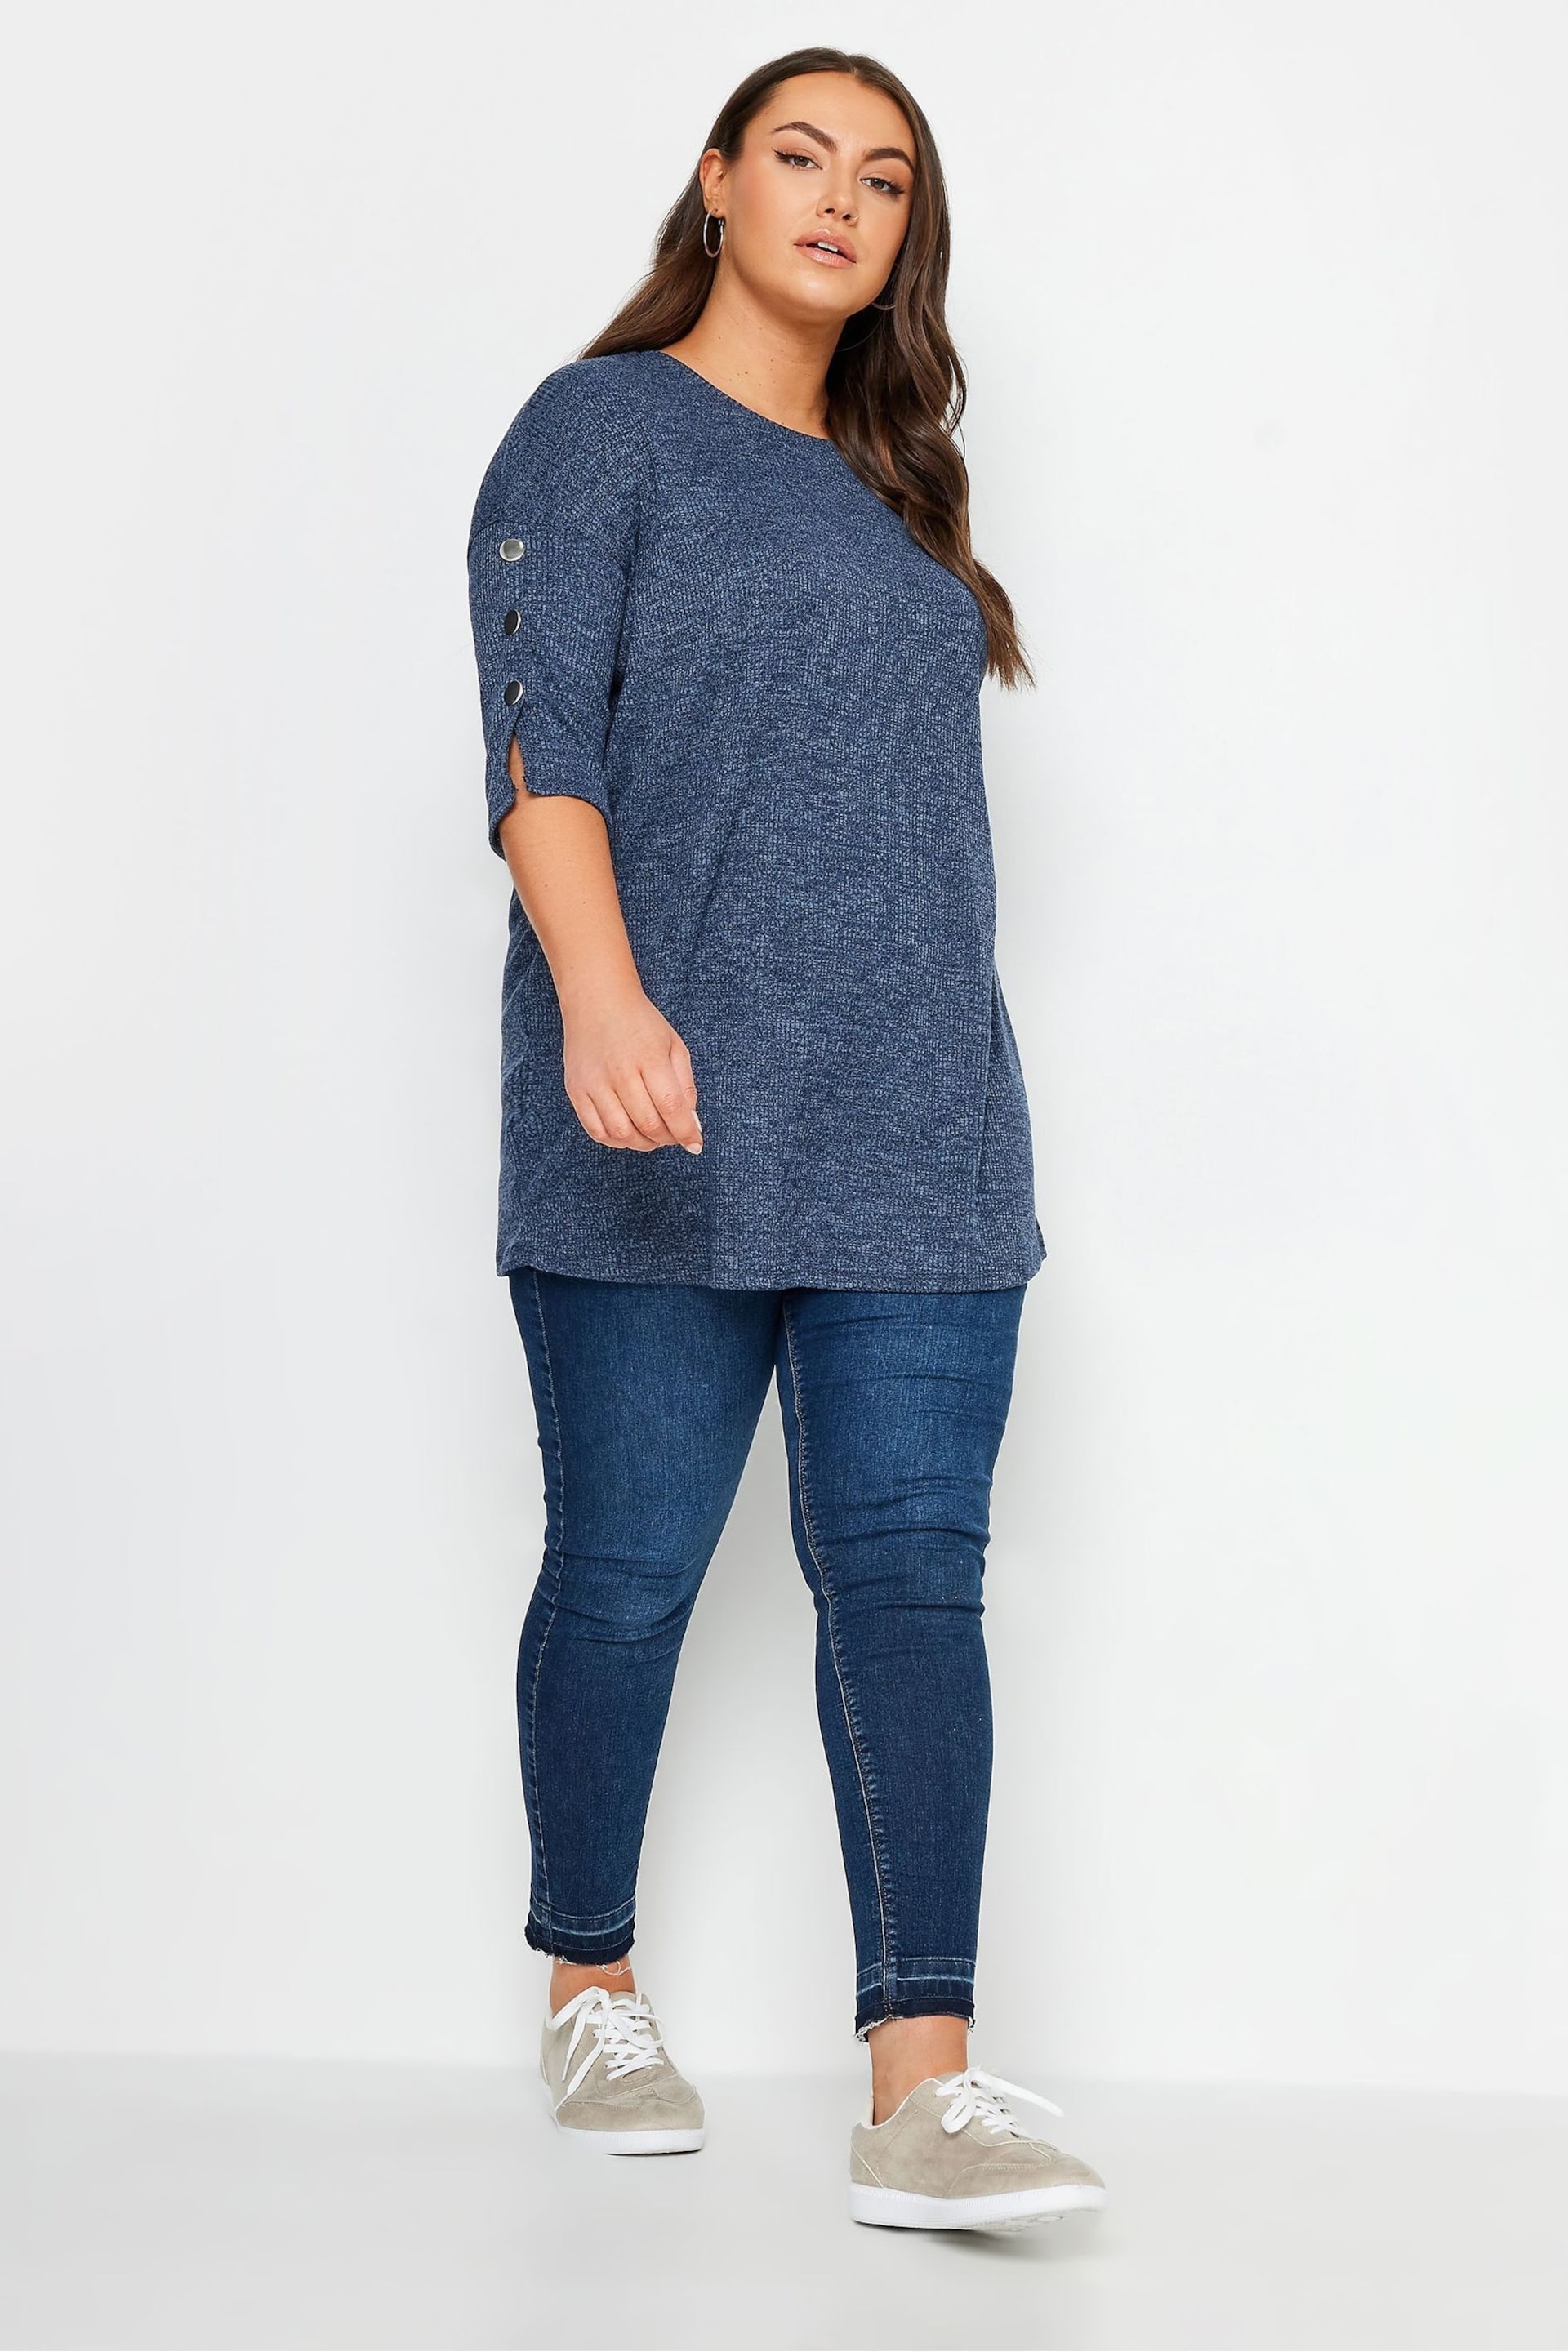 Yours Curve Mid Blue Batwing Sleeve Soft Touch Jumper - Image 2 of 4